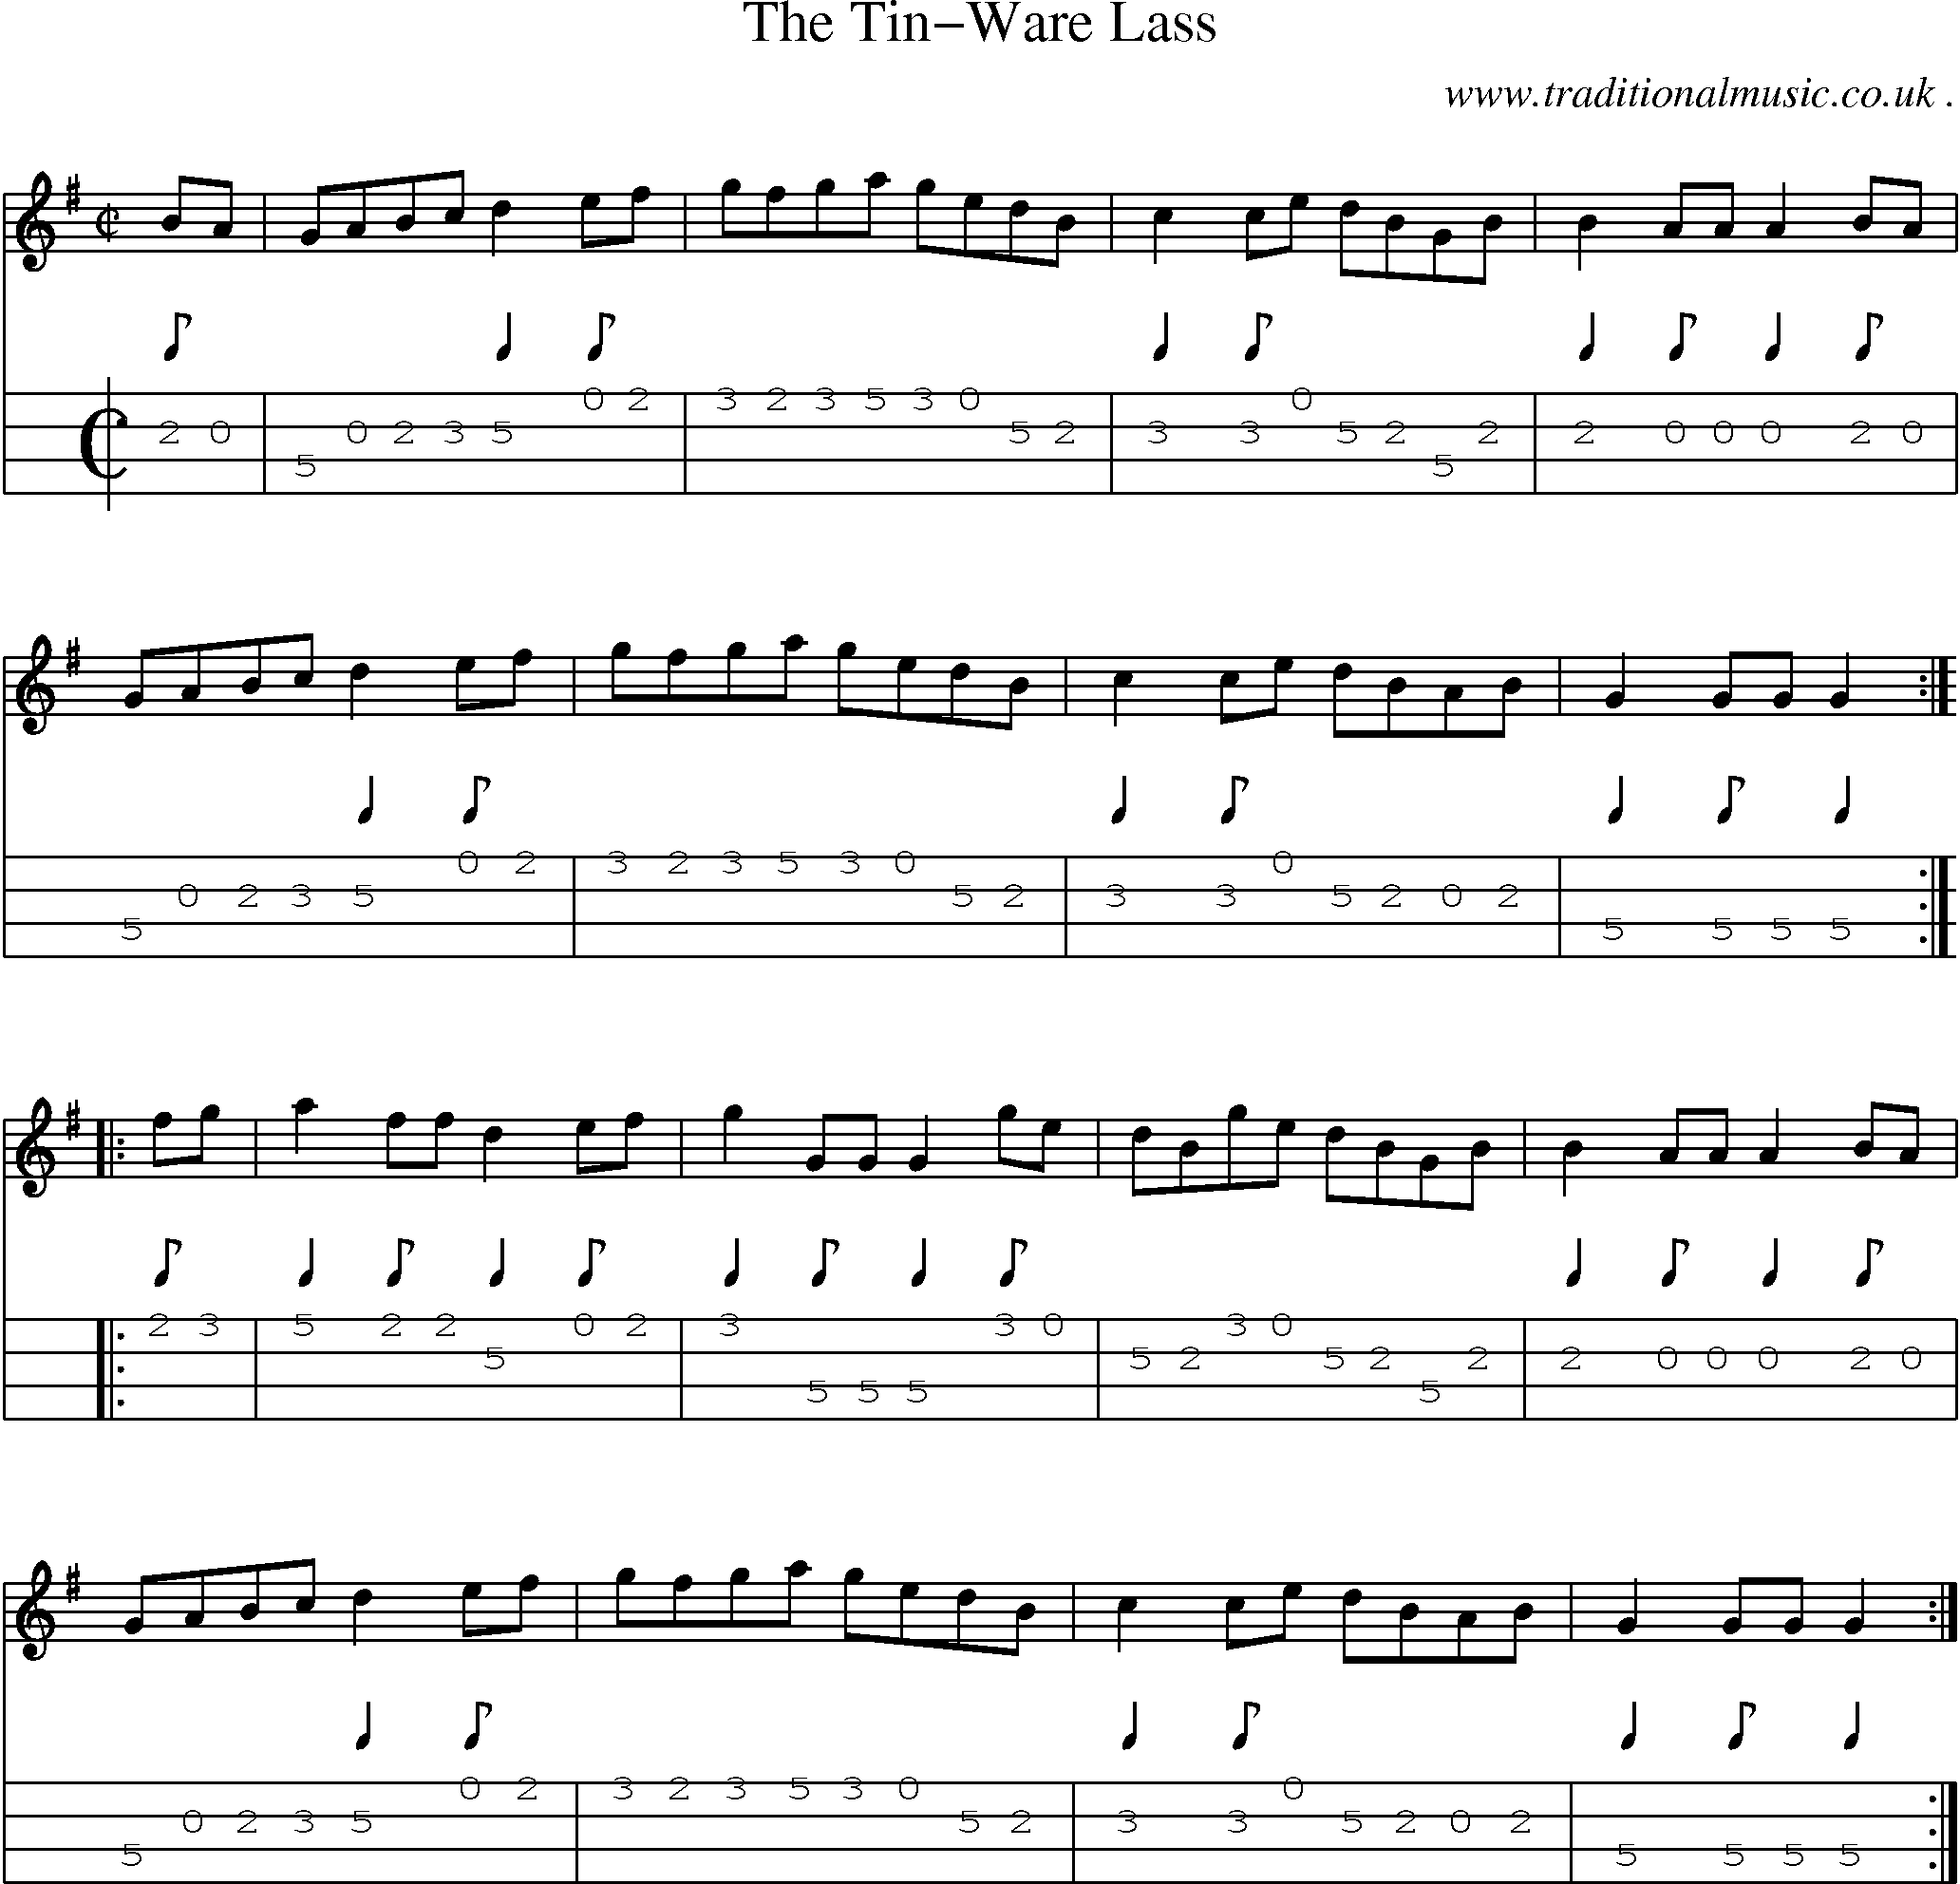 Sheet-Music and Mandolin Tabs for The Tin-ware Lass